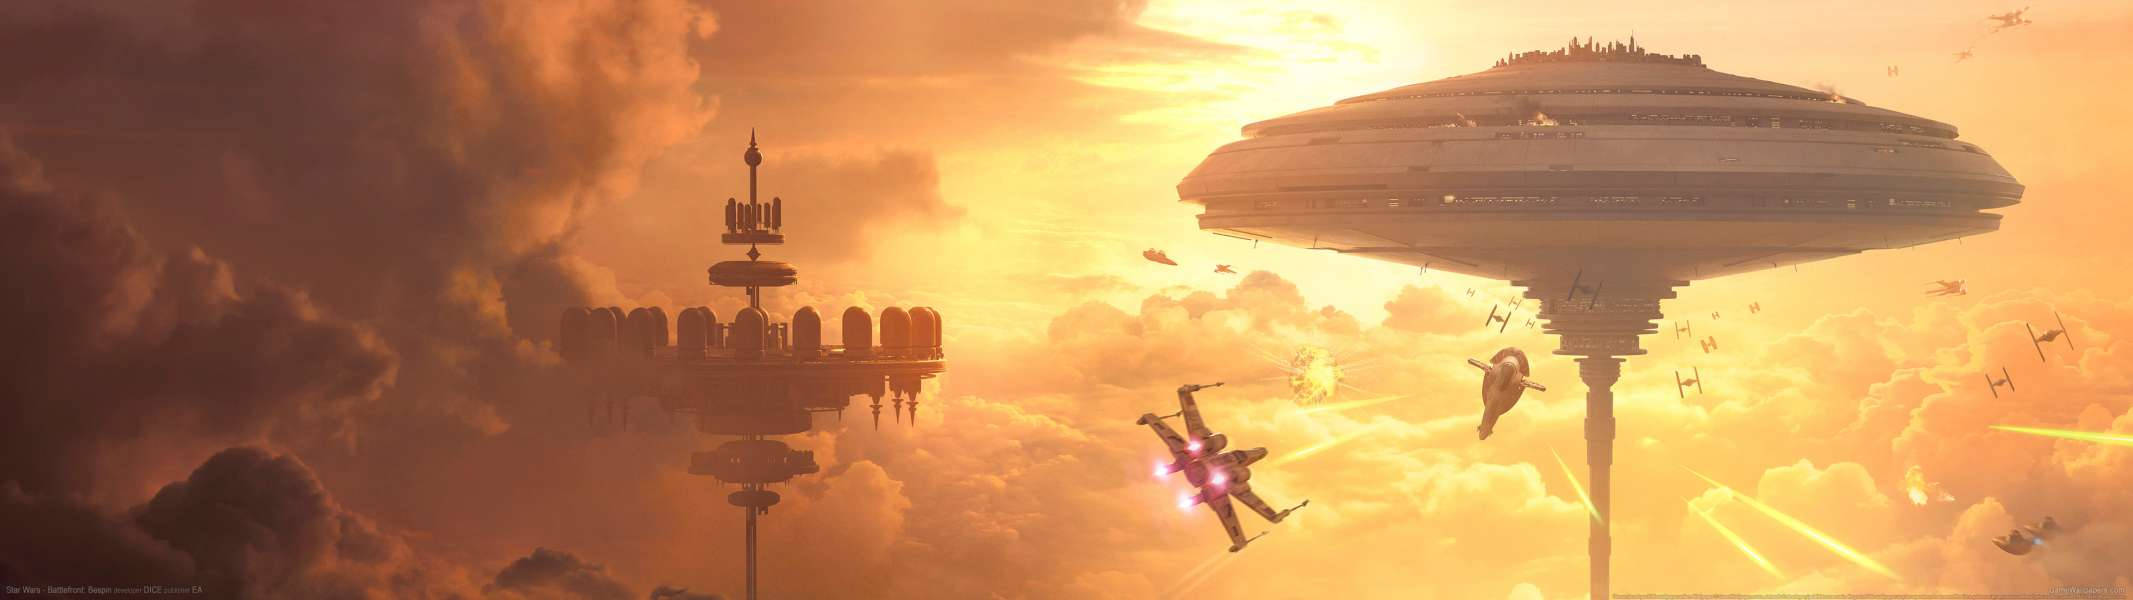 Dual Screen Star Wars Battlefront Bespin Background